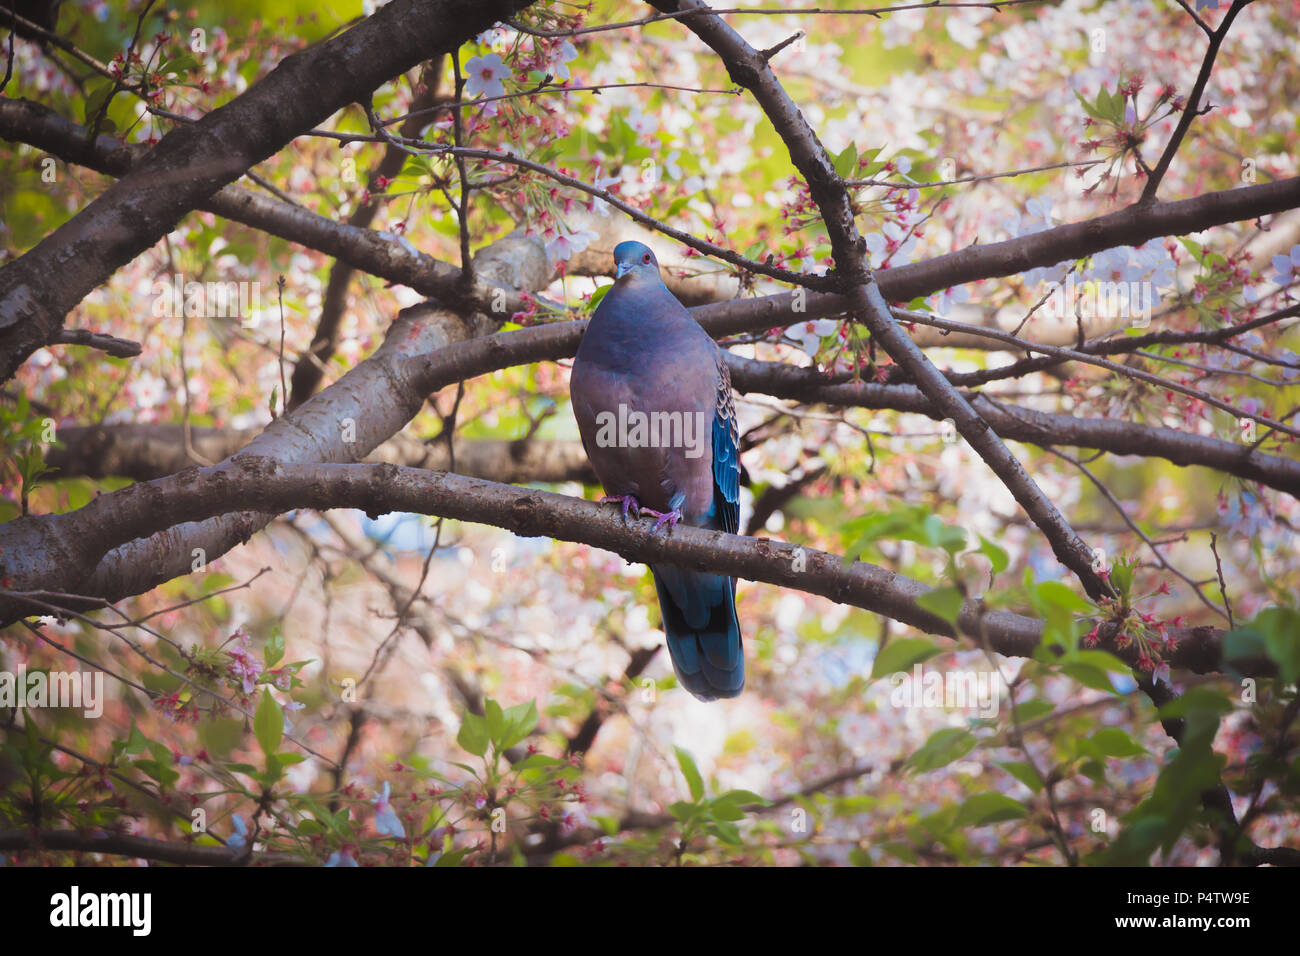 Stunning Pigeon Chilling on a Cherry Blossom Brunch Stock Photo